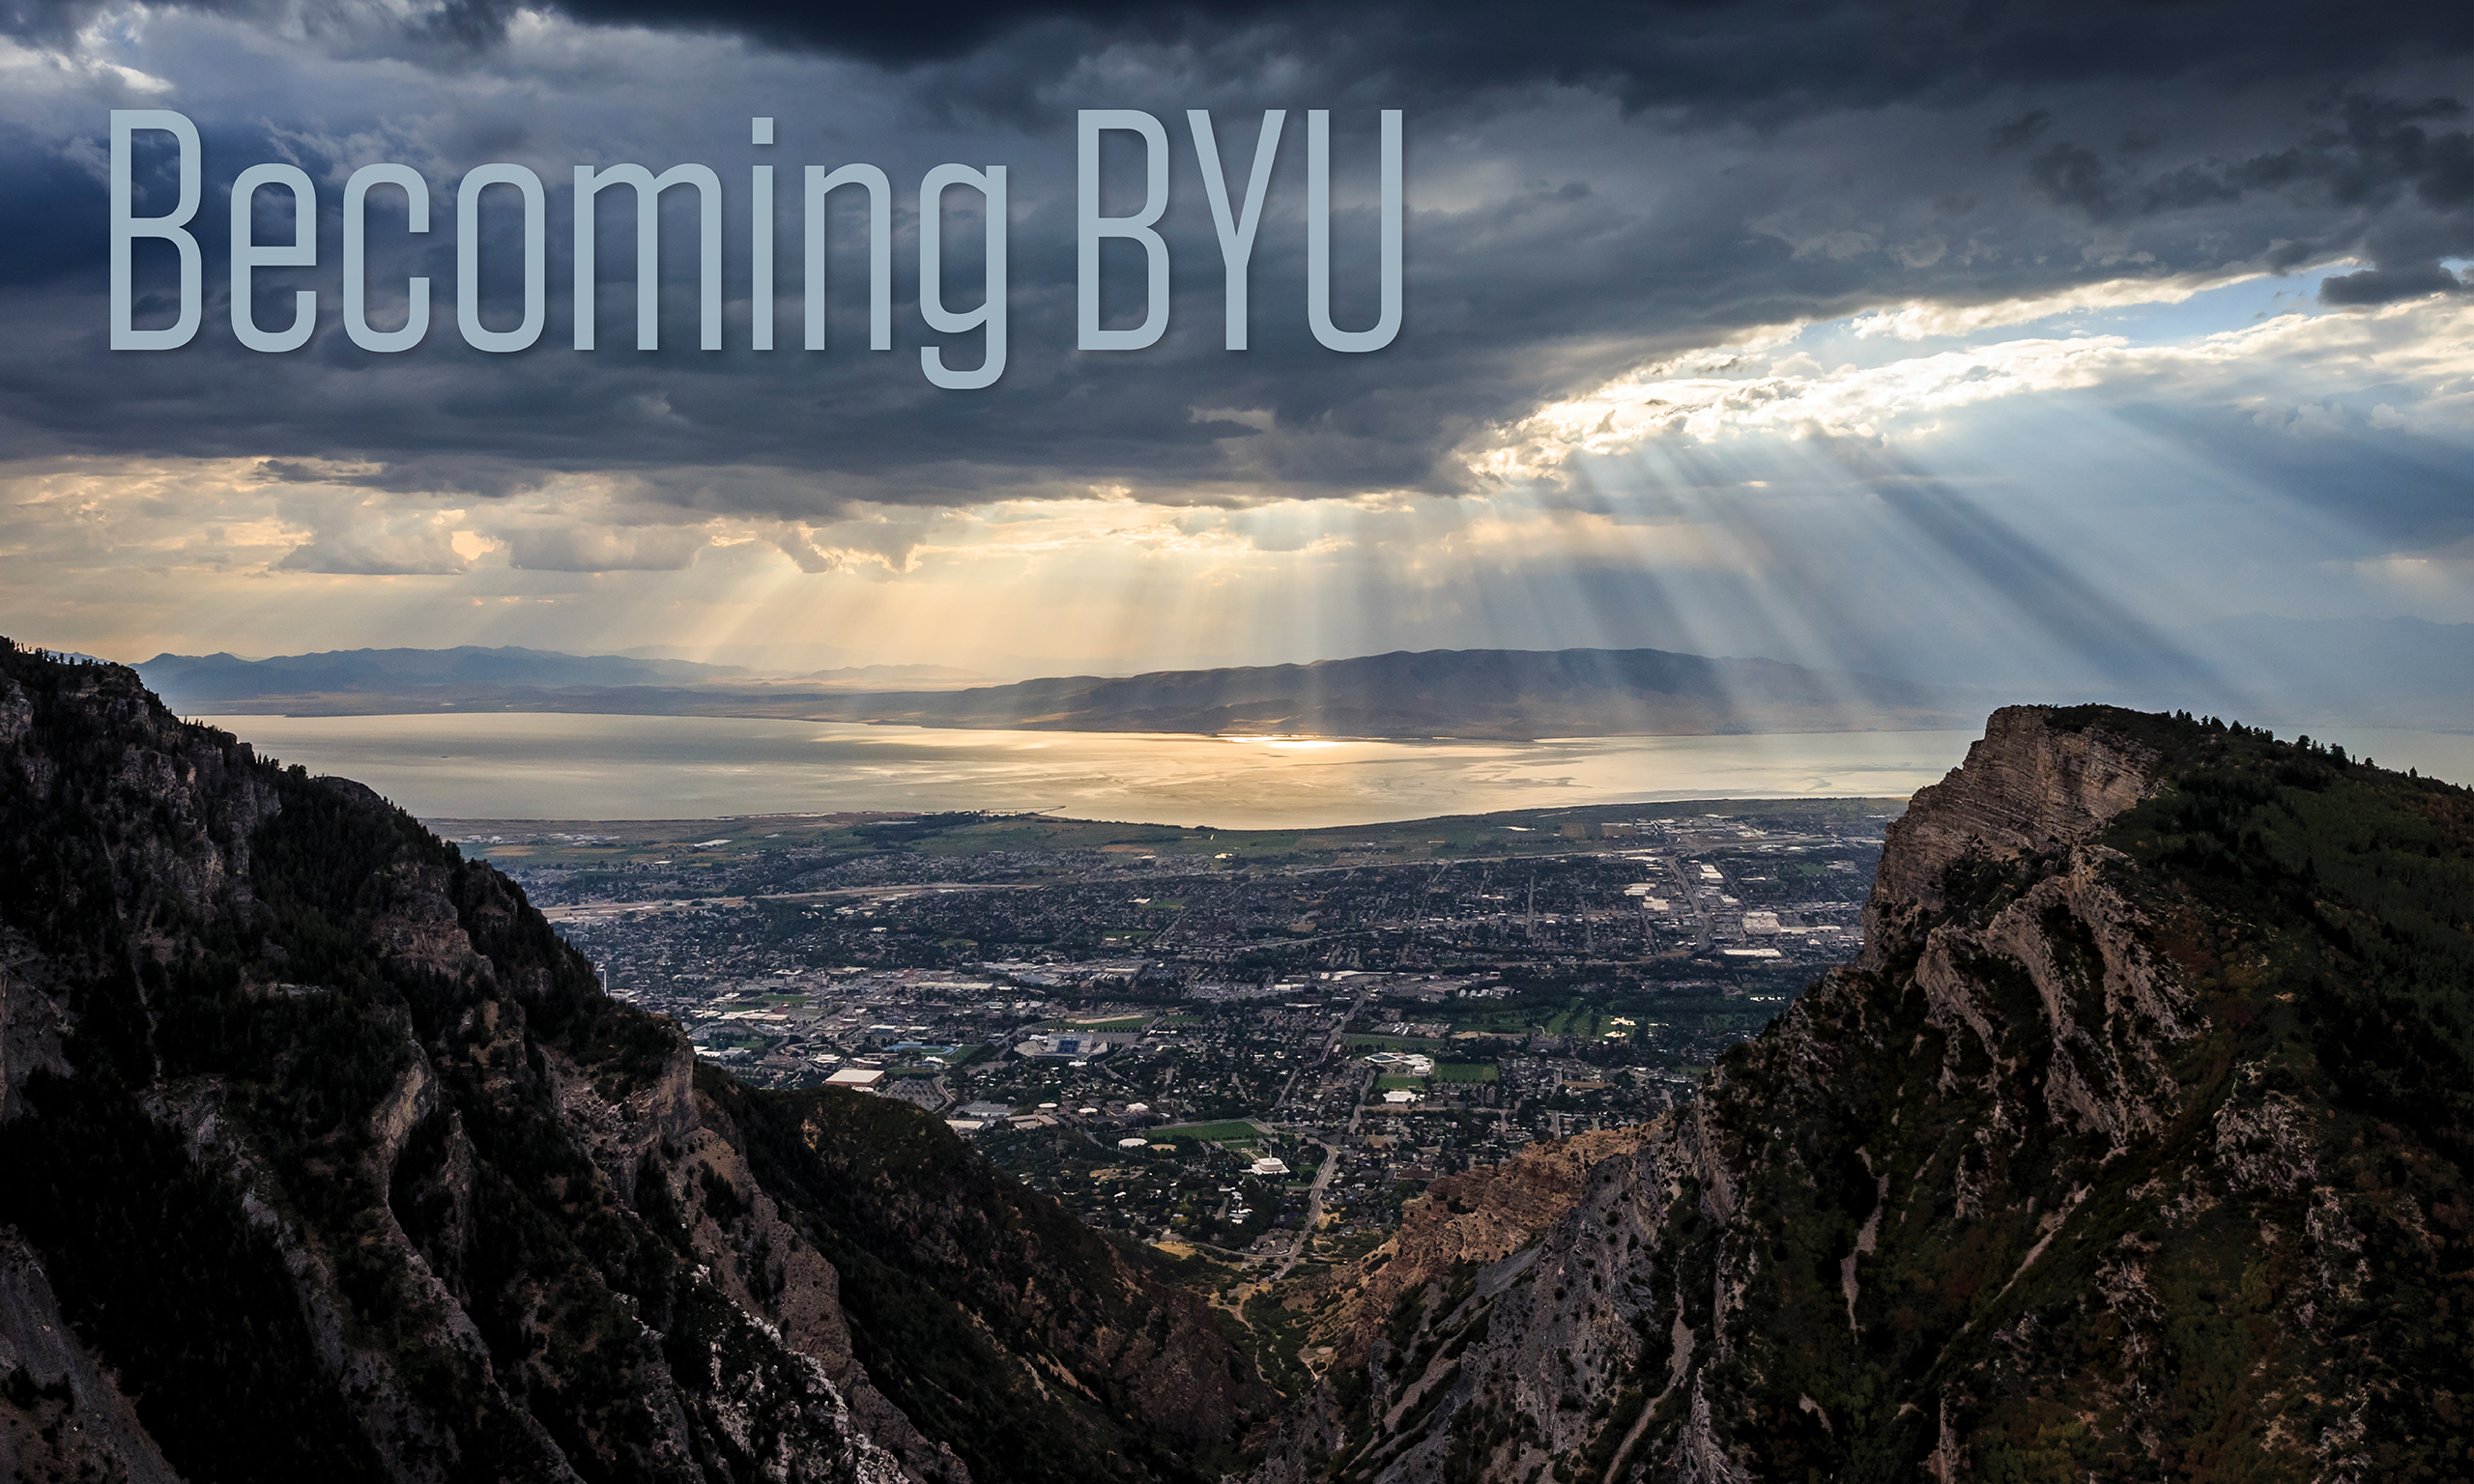 A view of Utah Valley from Rock Canyon, with light streaming down from clouds. The words Becoming BYU are printed near the top.